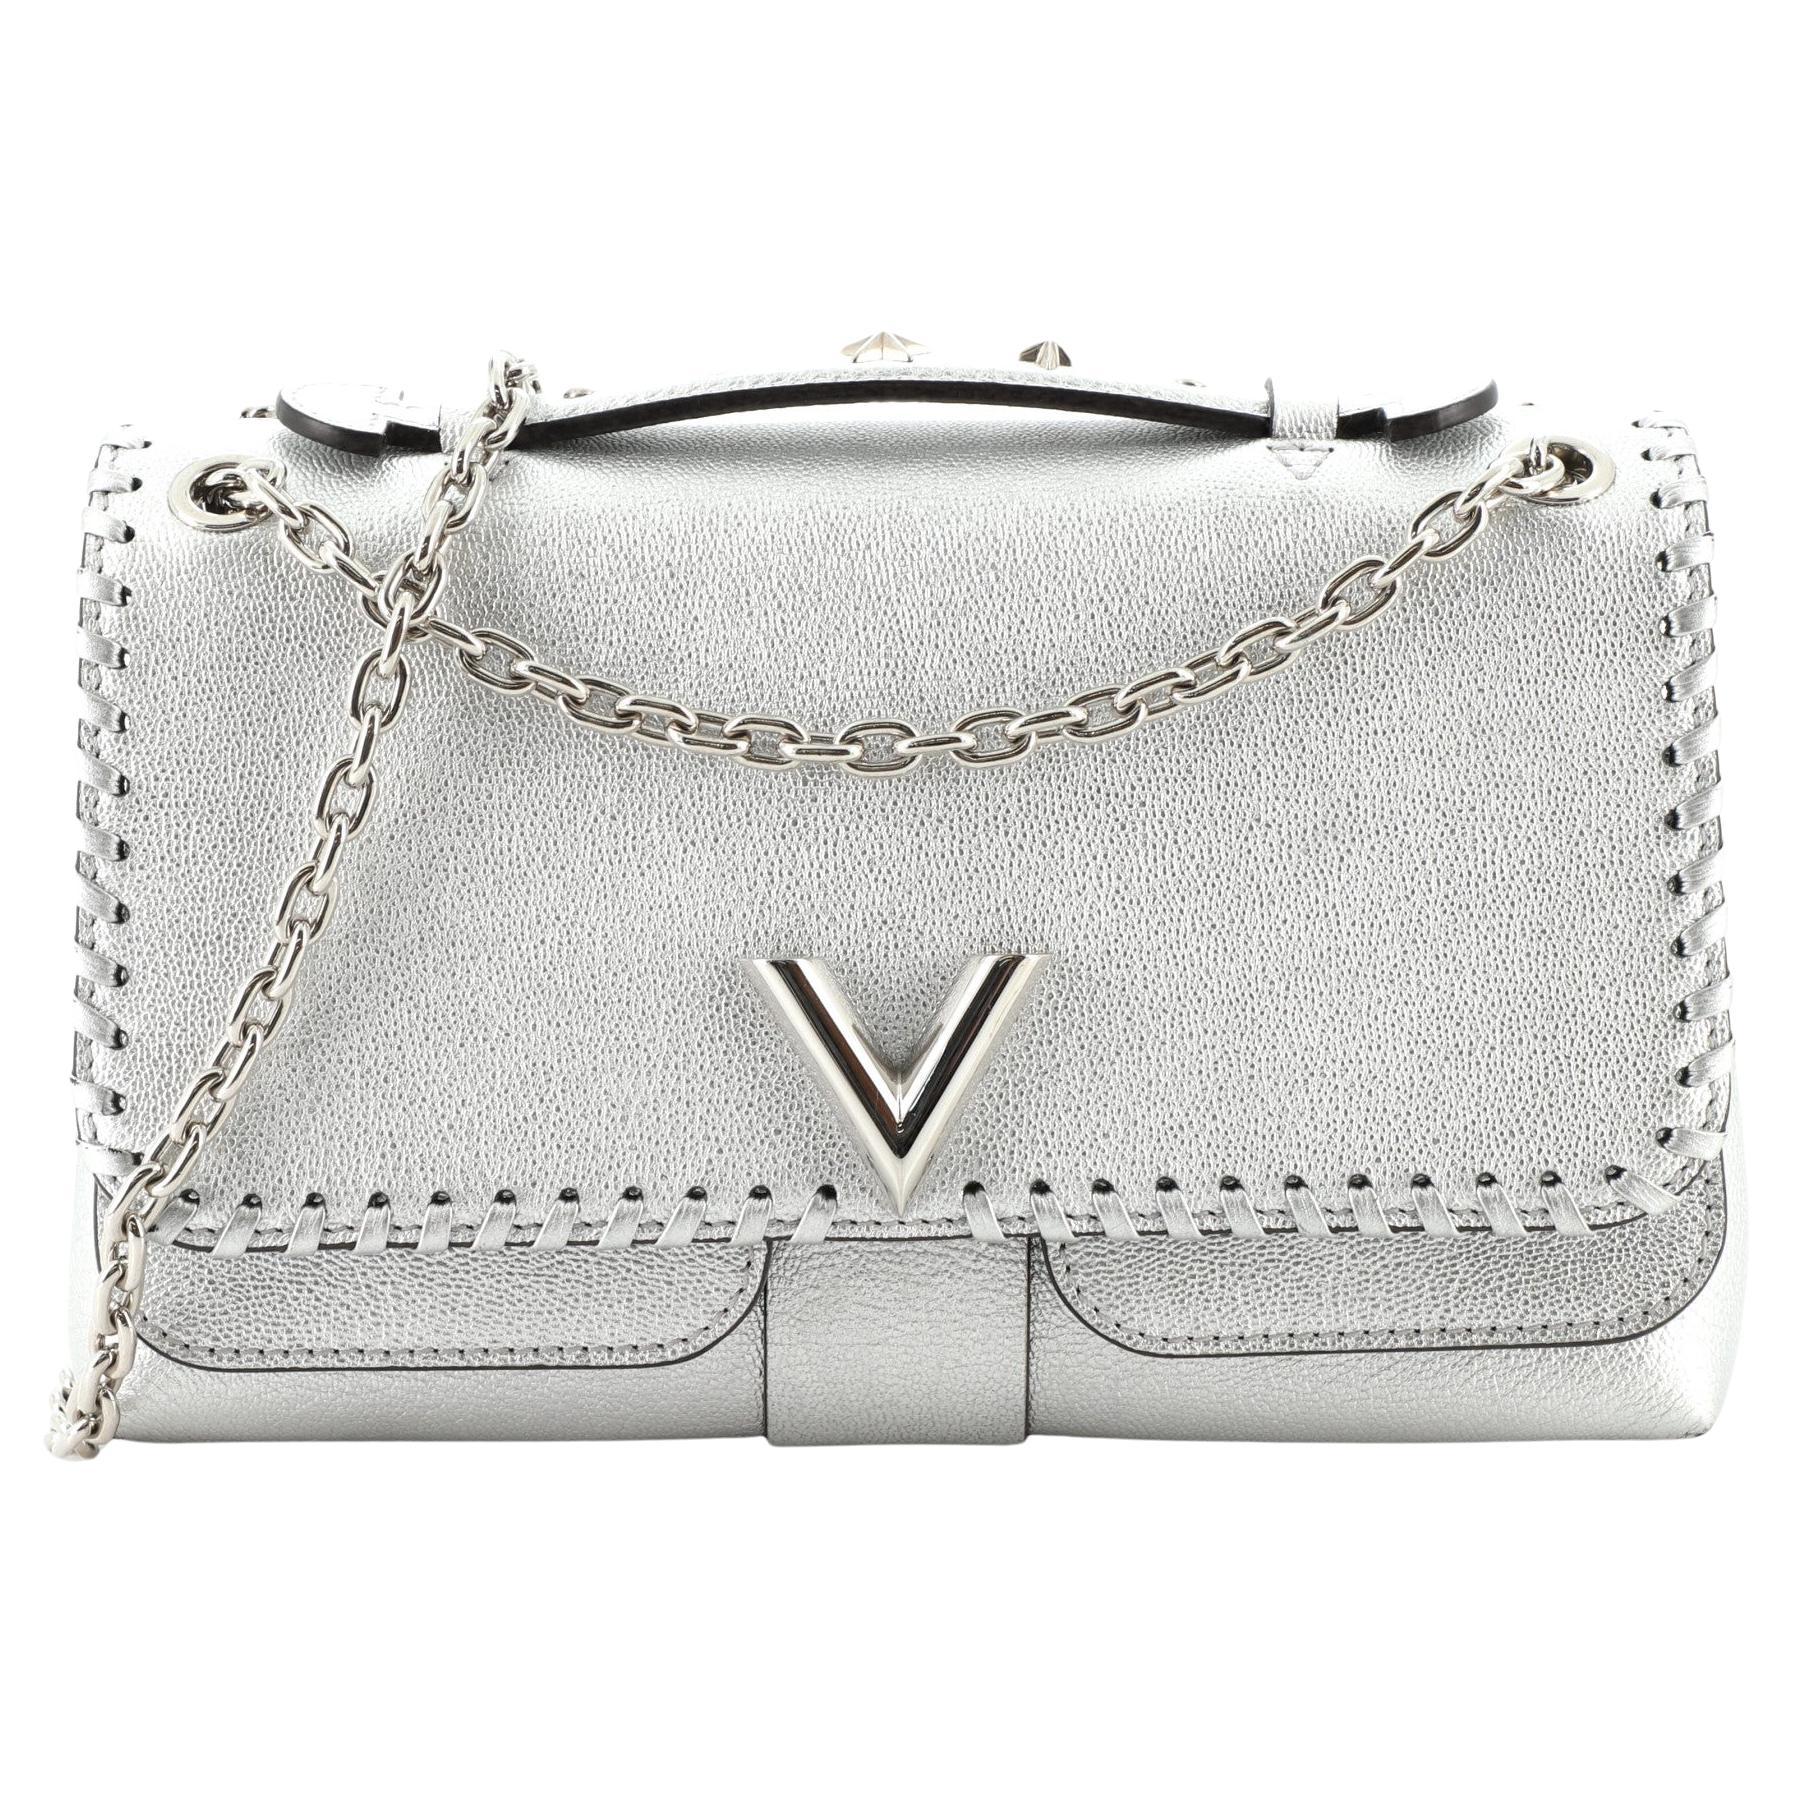  Louis Vuitton Very Chain Bag Whipstitch Leather